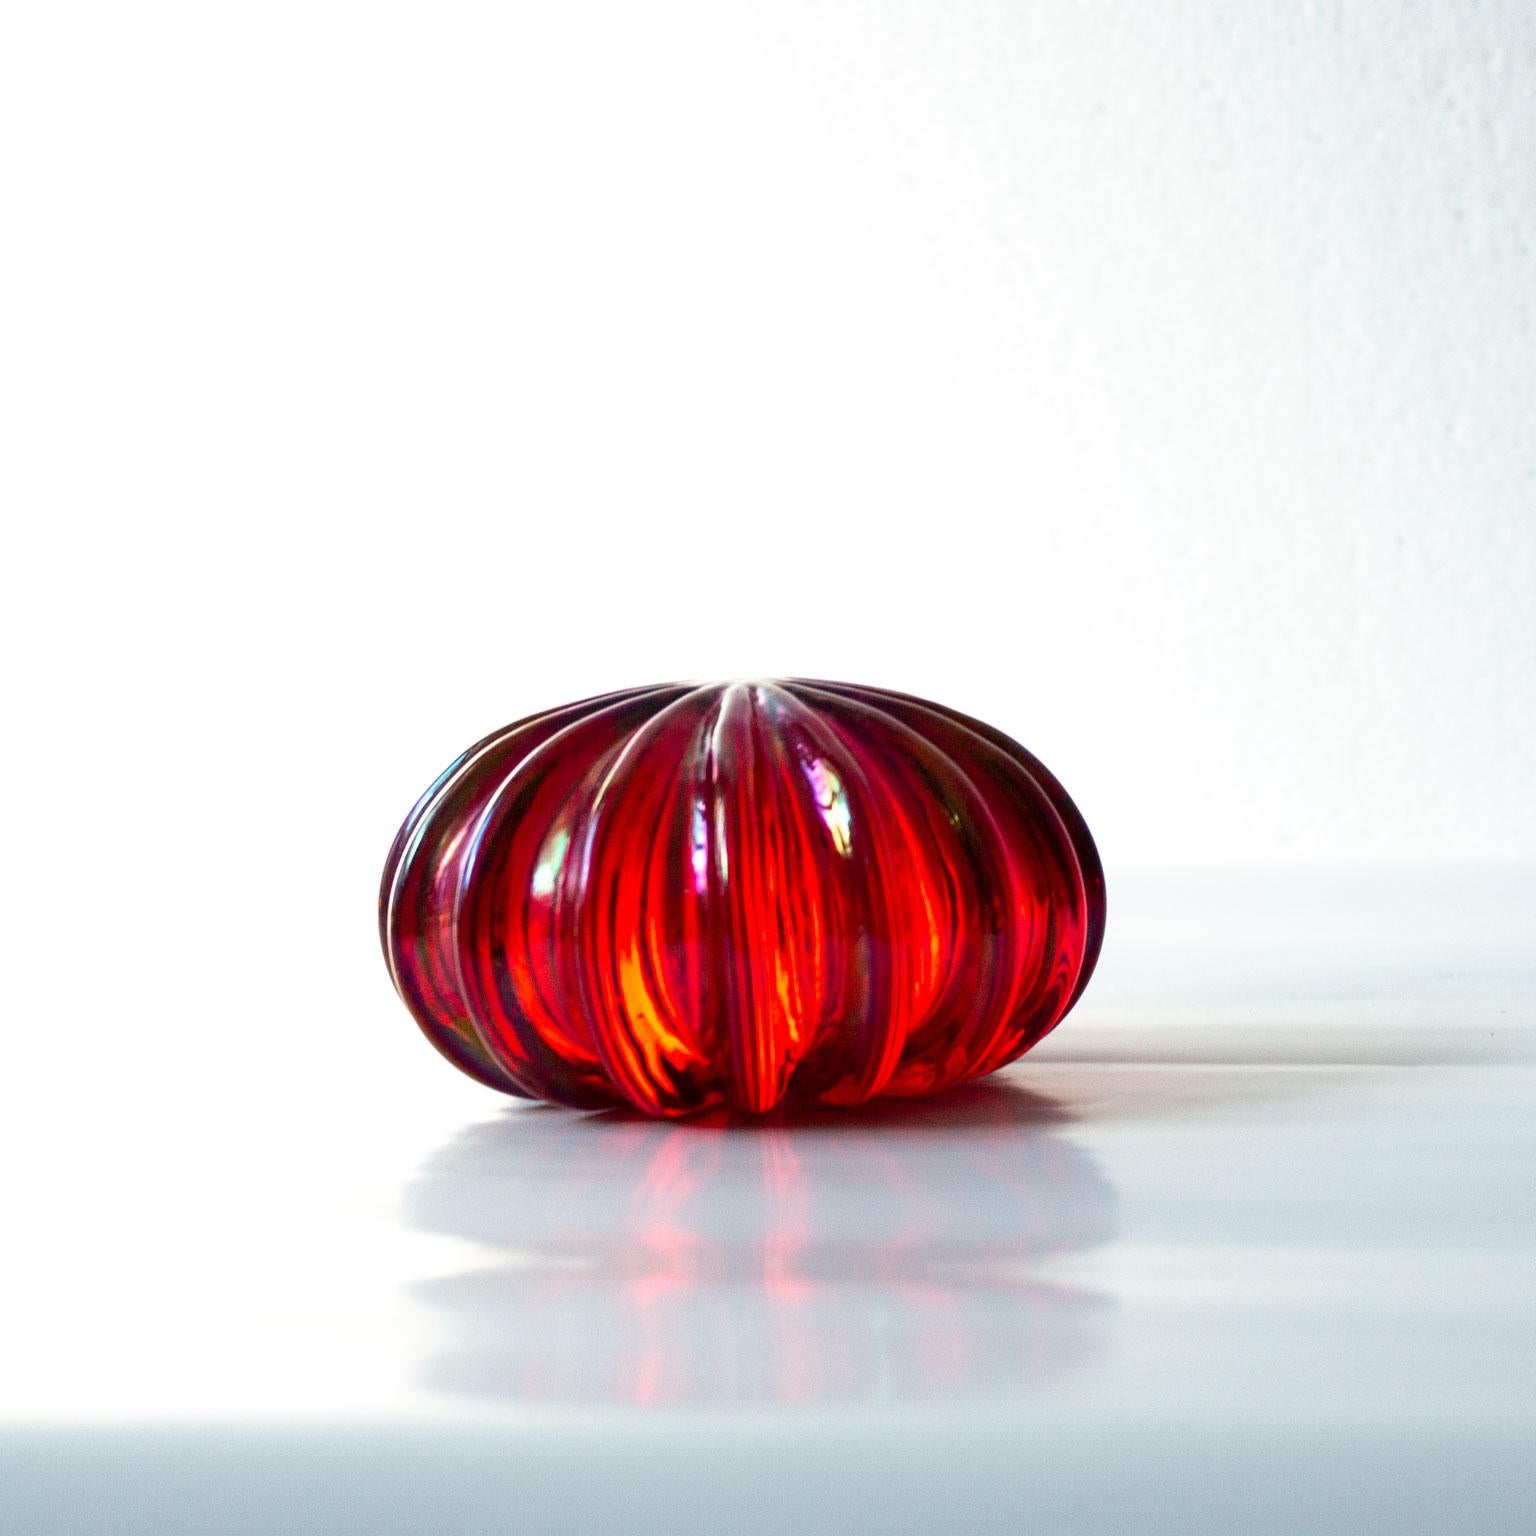 Signed Archimede Seguso Glass Paperweigh. Made in Murano, Italy. Ruby red glass with iridescent inclusions, circa 1970s. Signed A. Seguso. Murano. A poetic candy jewel that makes you happy every time you look at it.